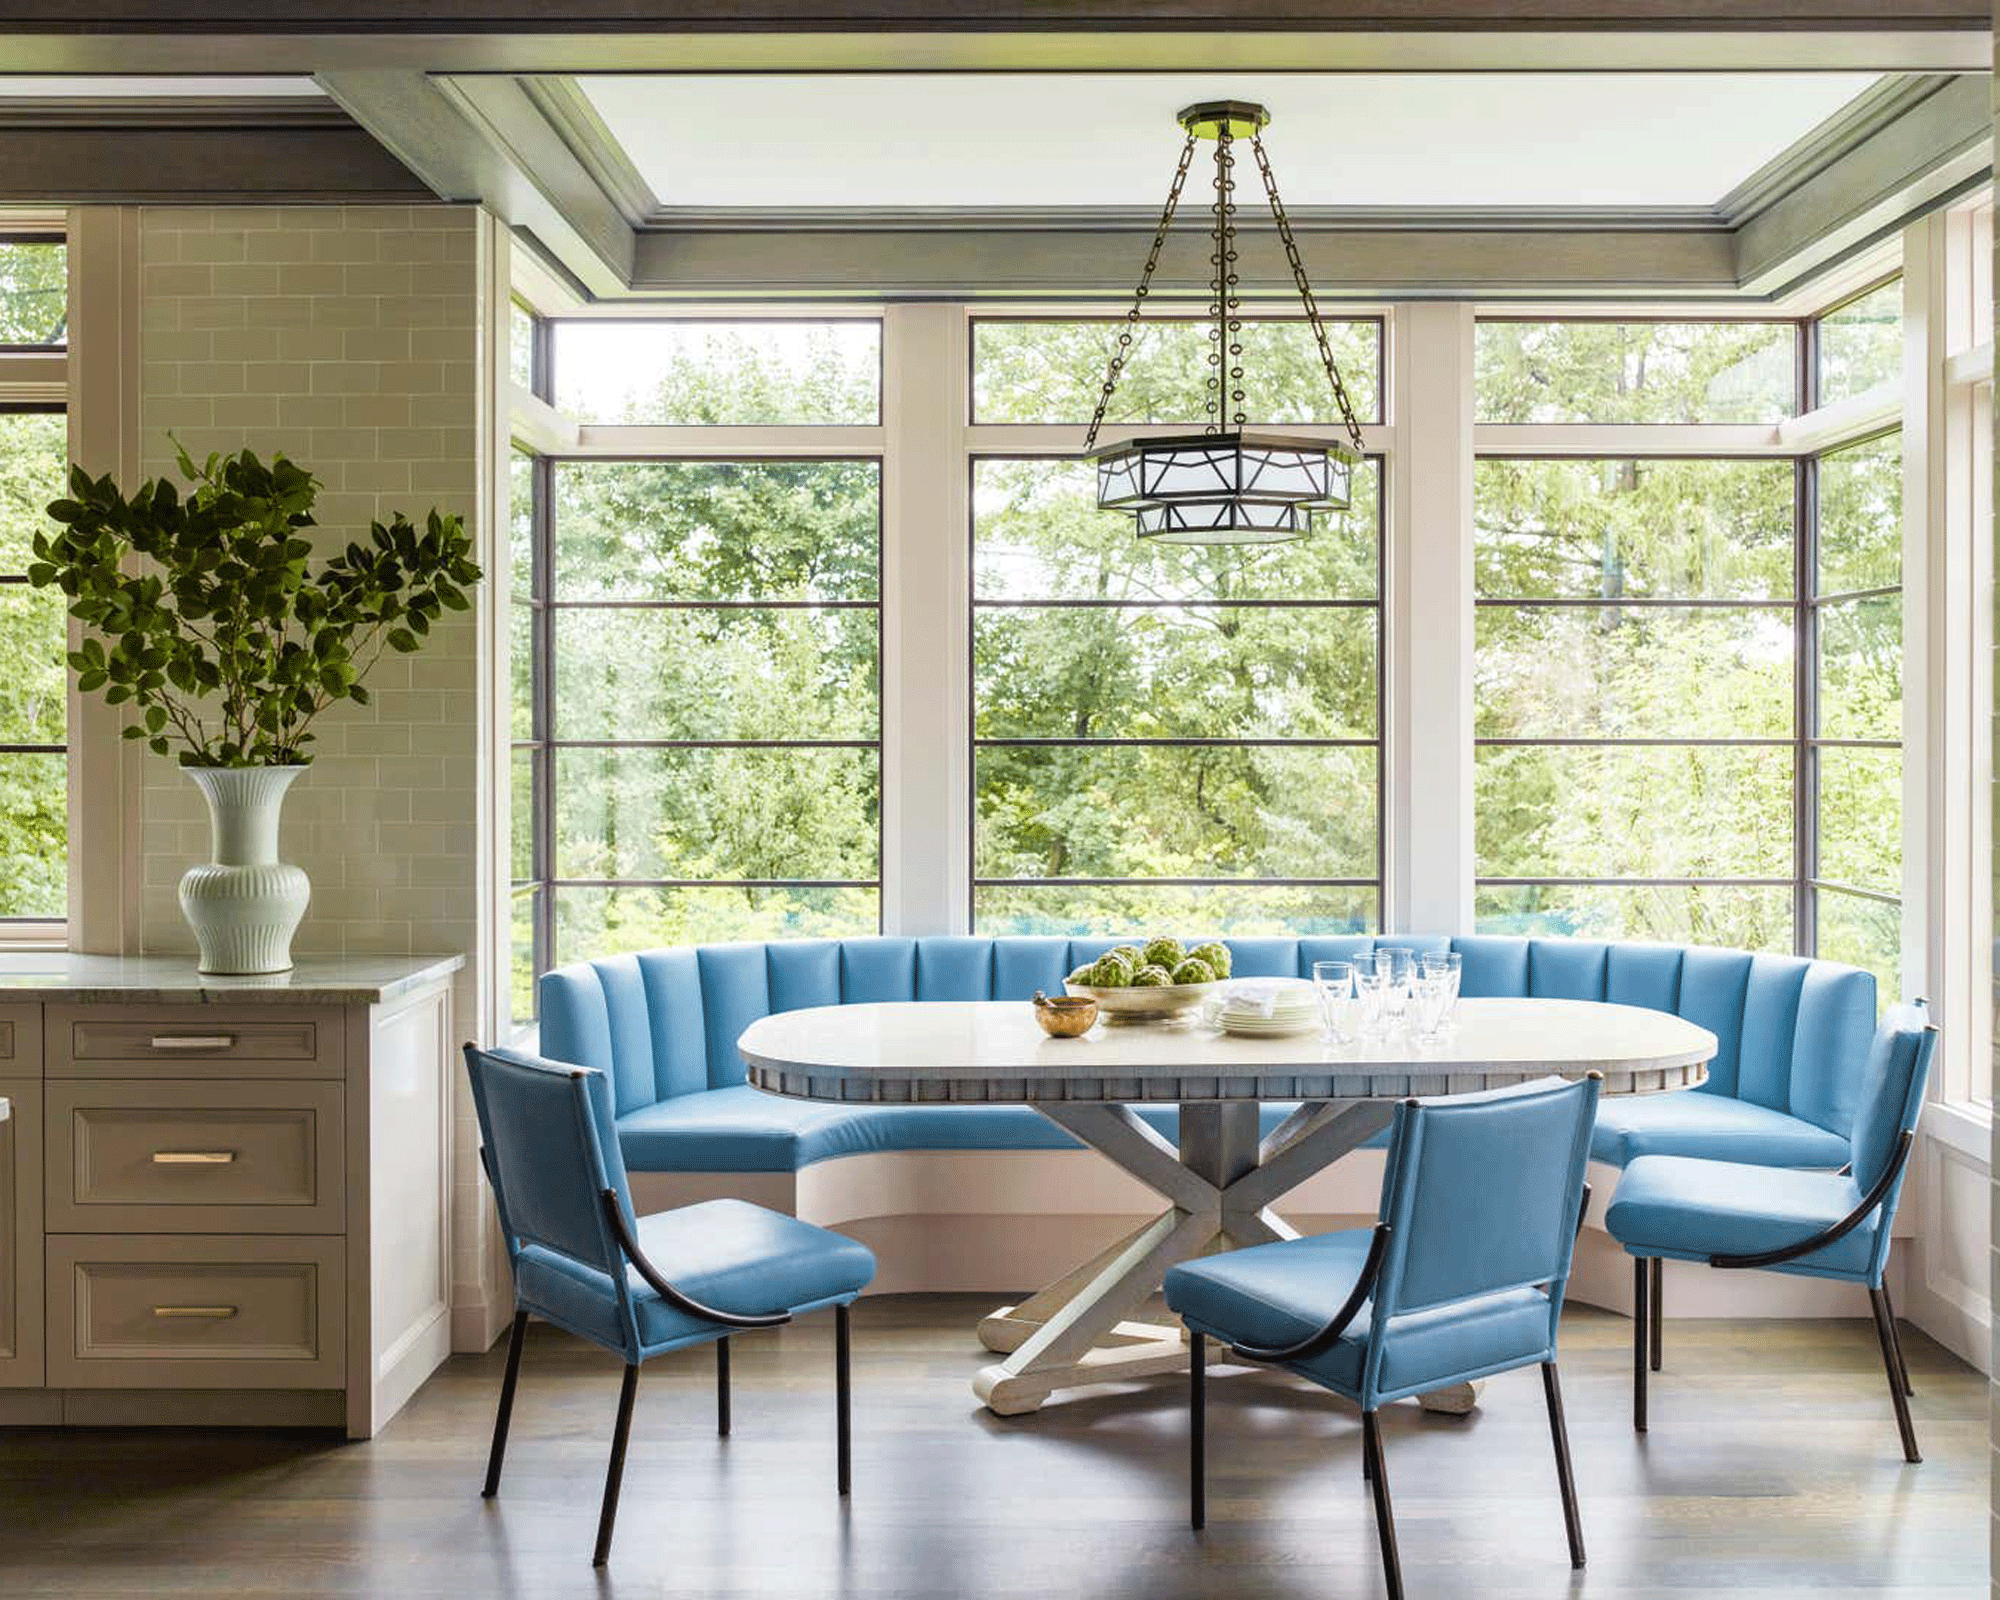 Kitchen with dining nook that has a pale blu. curved banquette and round table